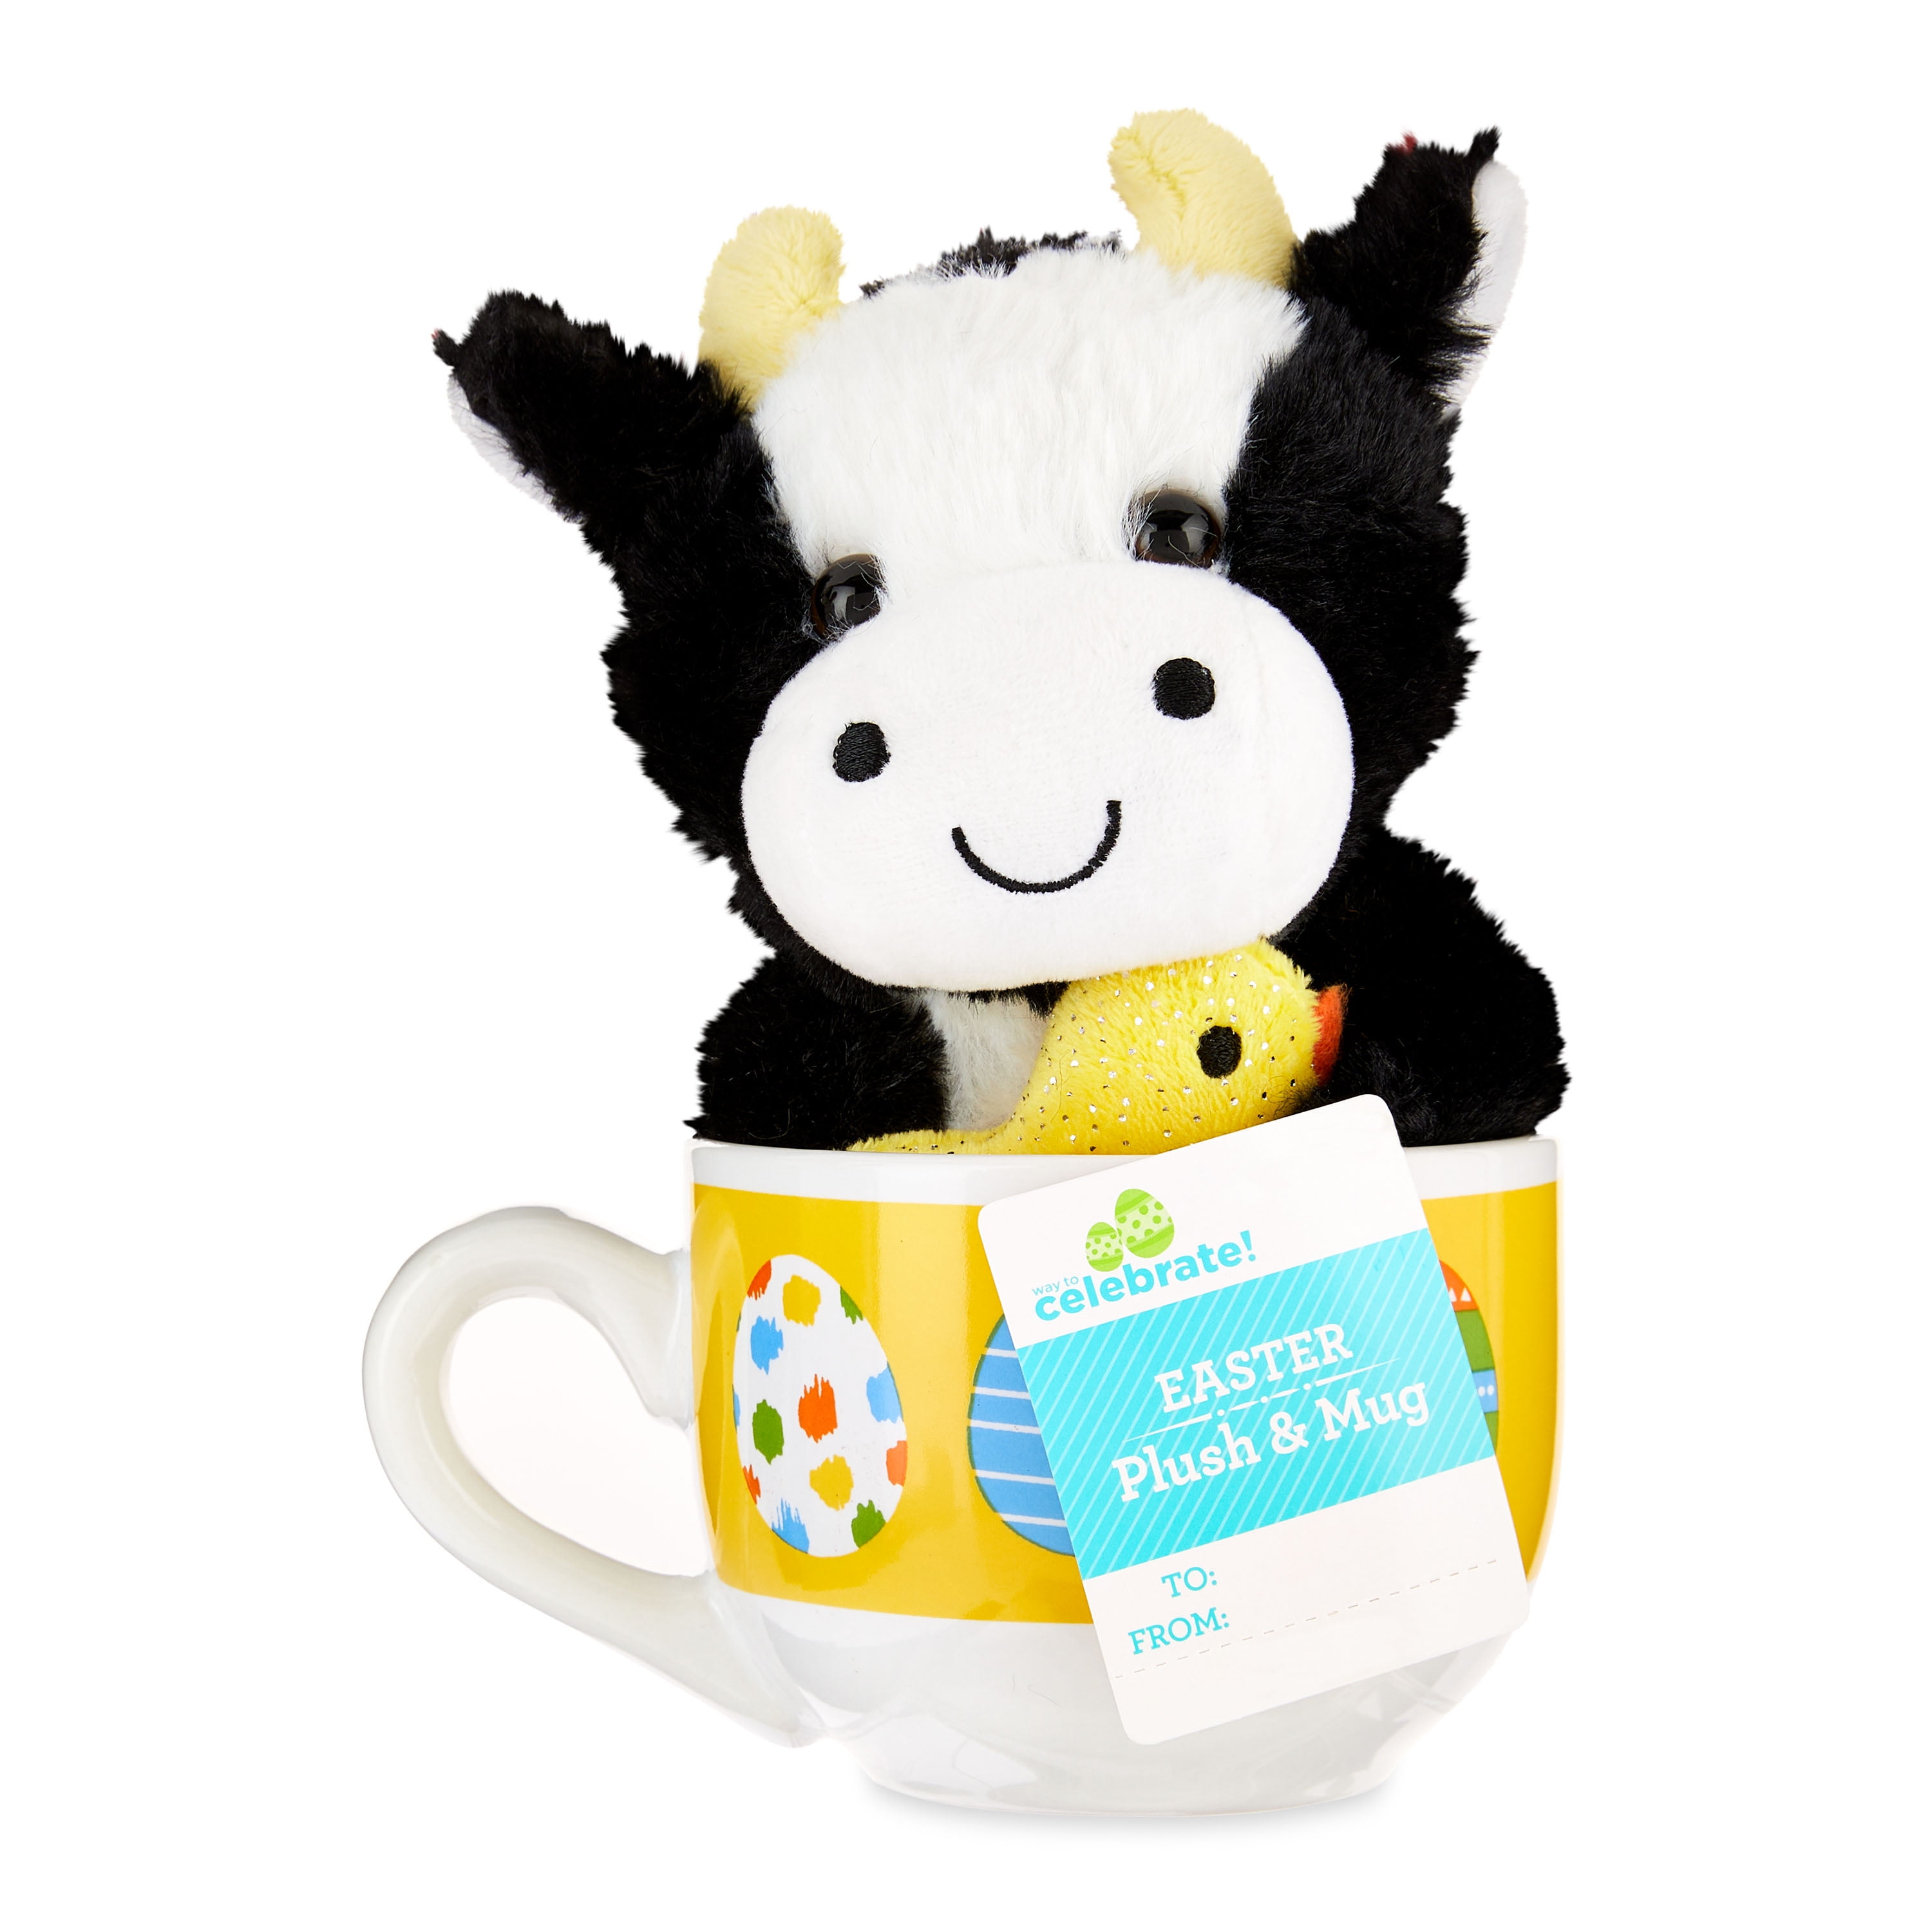 "Way to Celebrate! Easter Plush in Soup Mug, Cow"